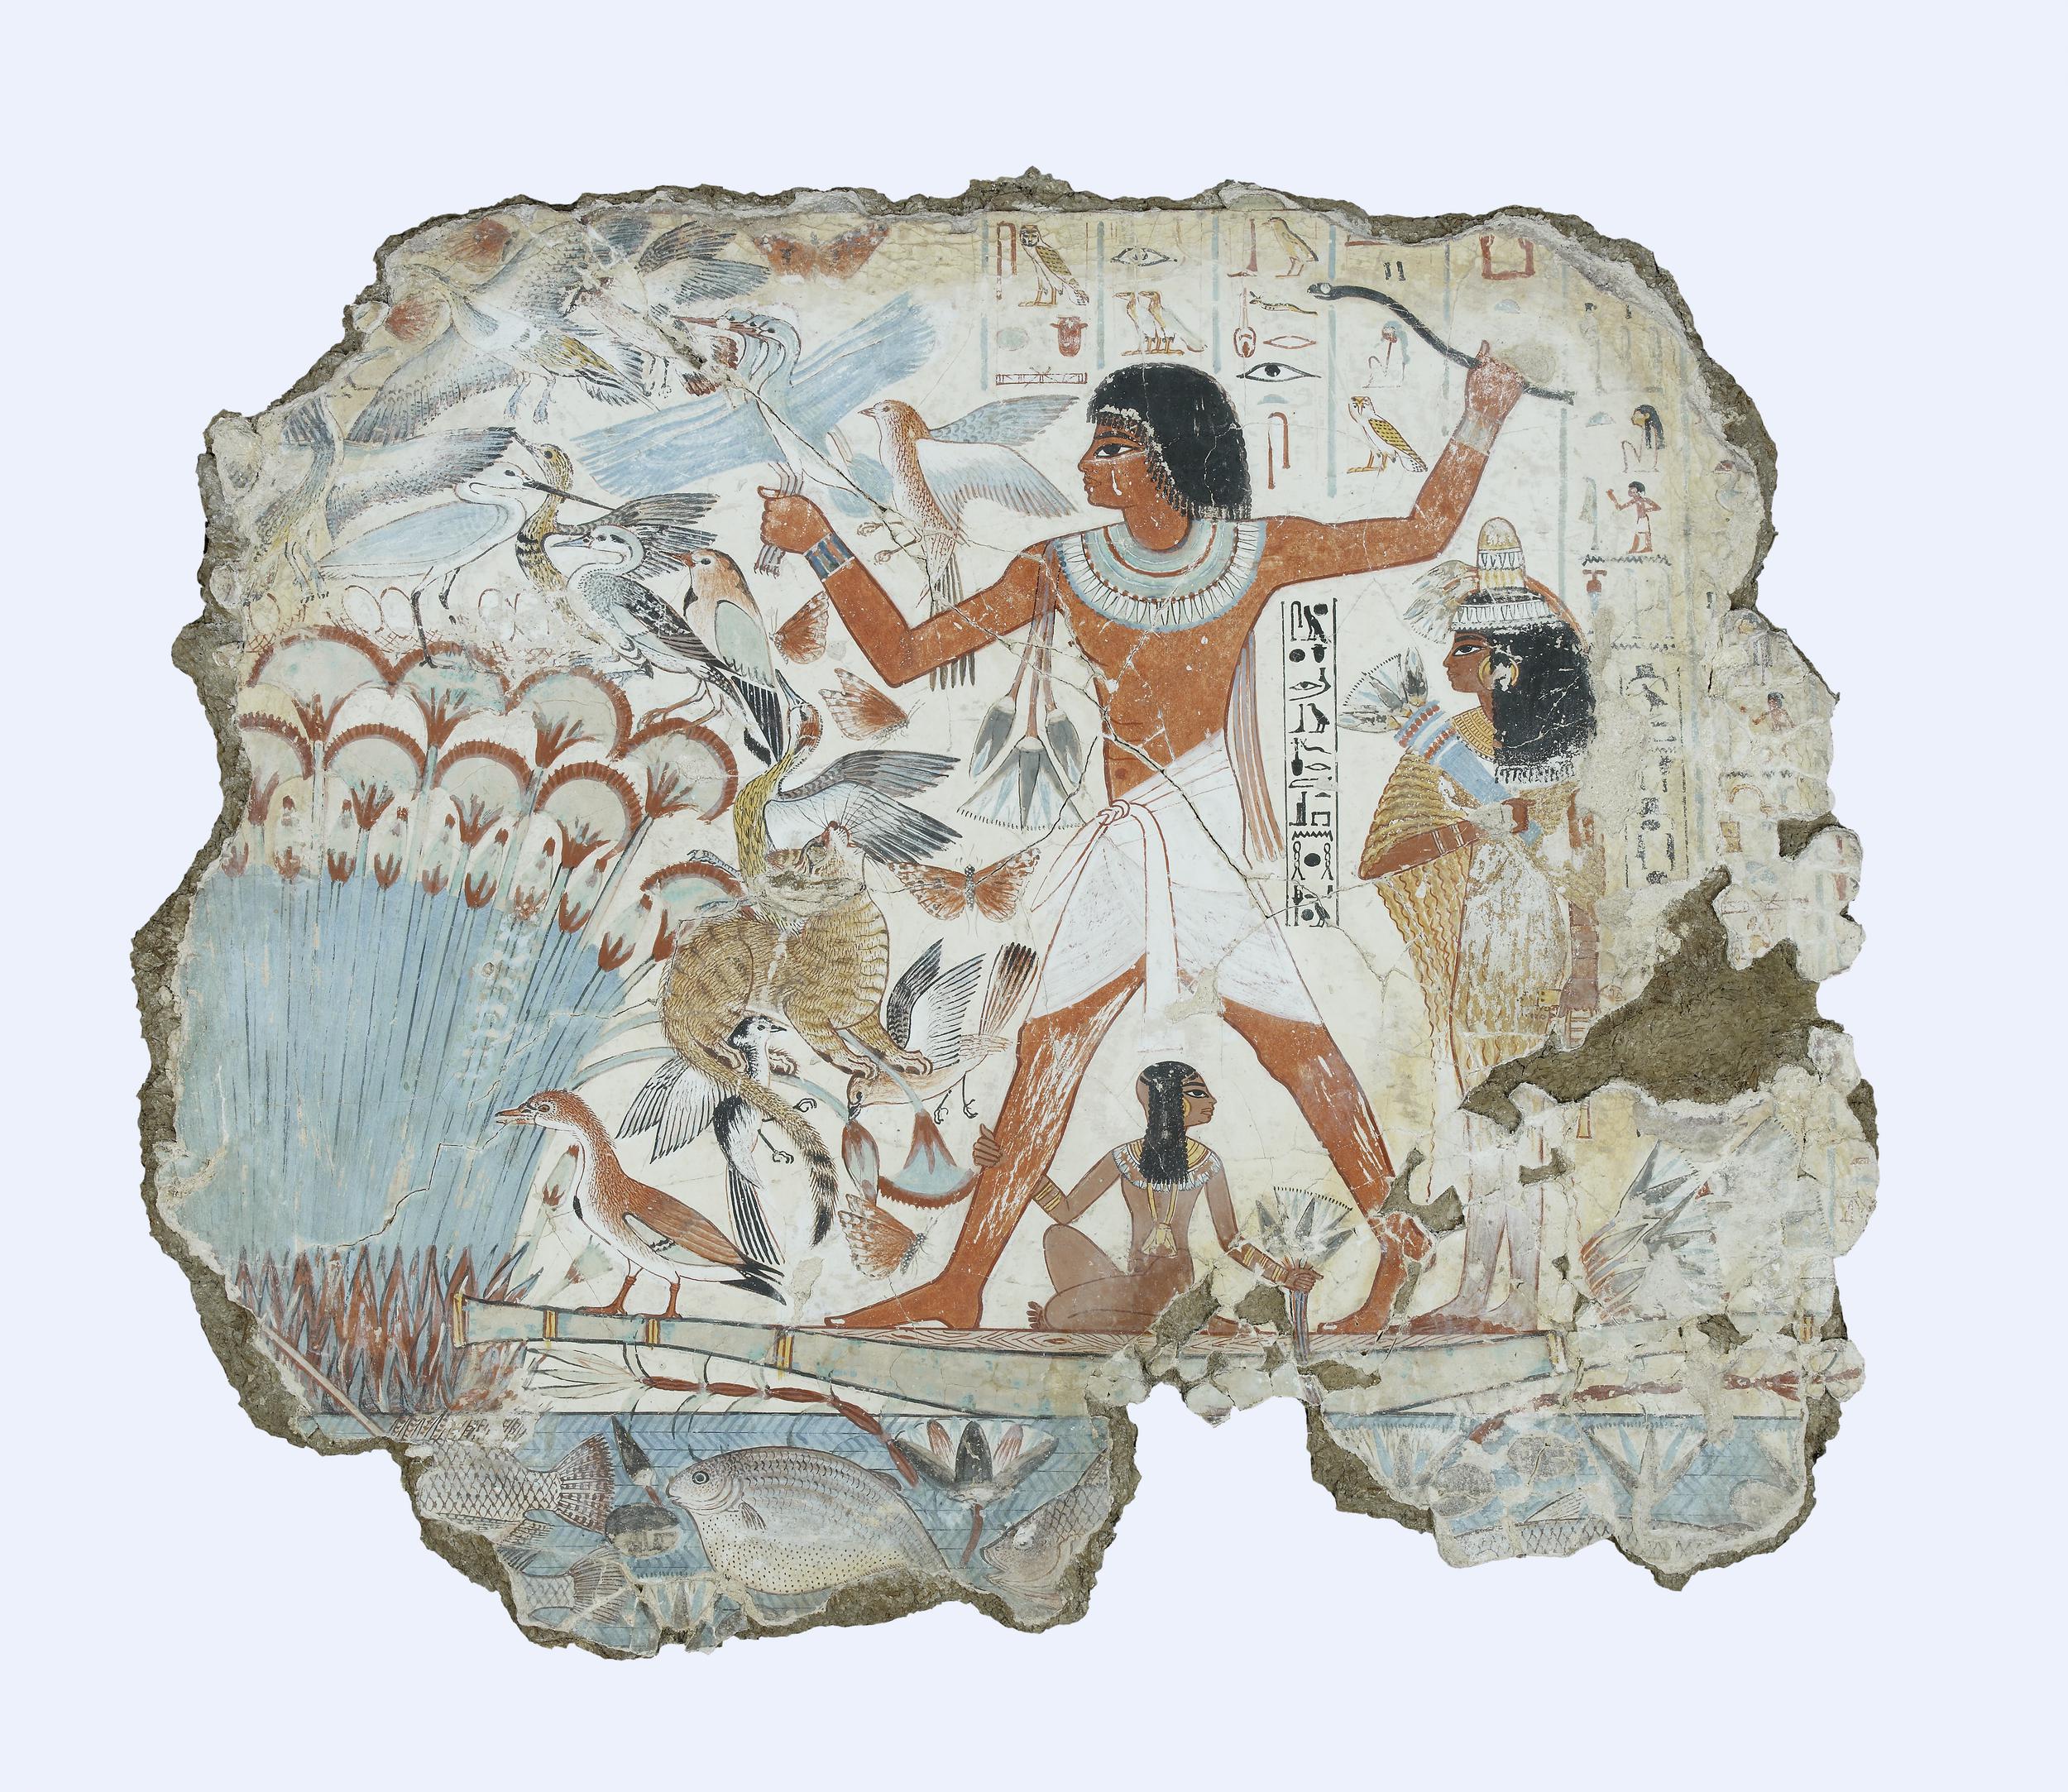 Paintings from the Tomb-chapel of Nebamun (article) | Khan Academy